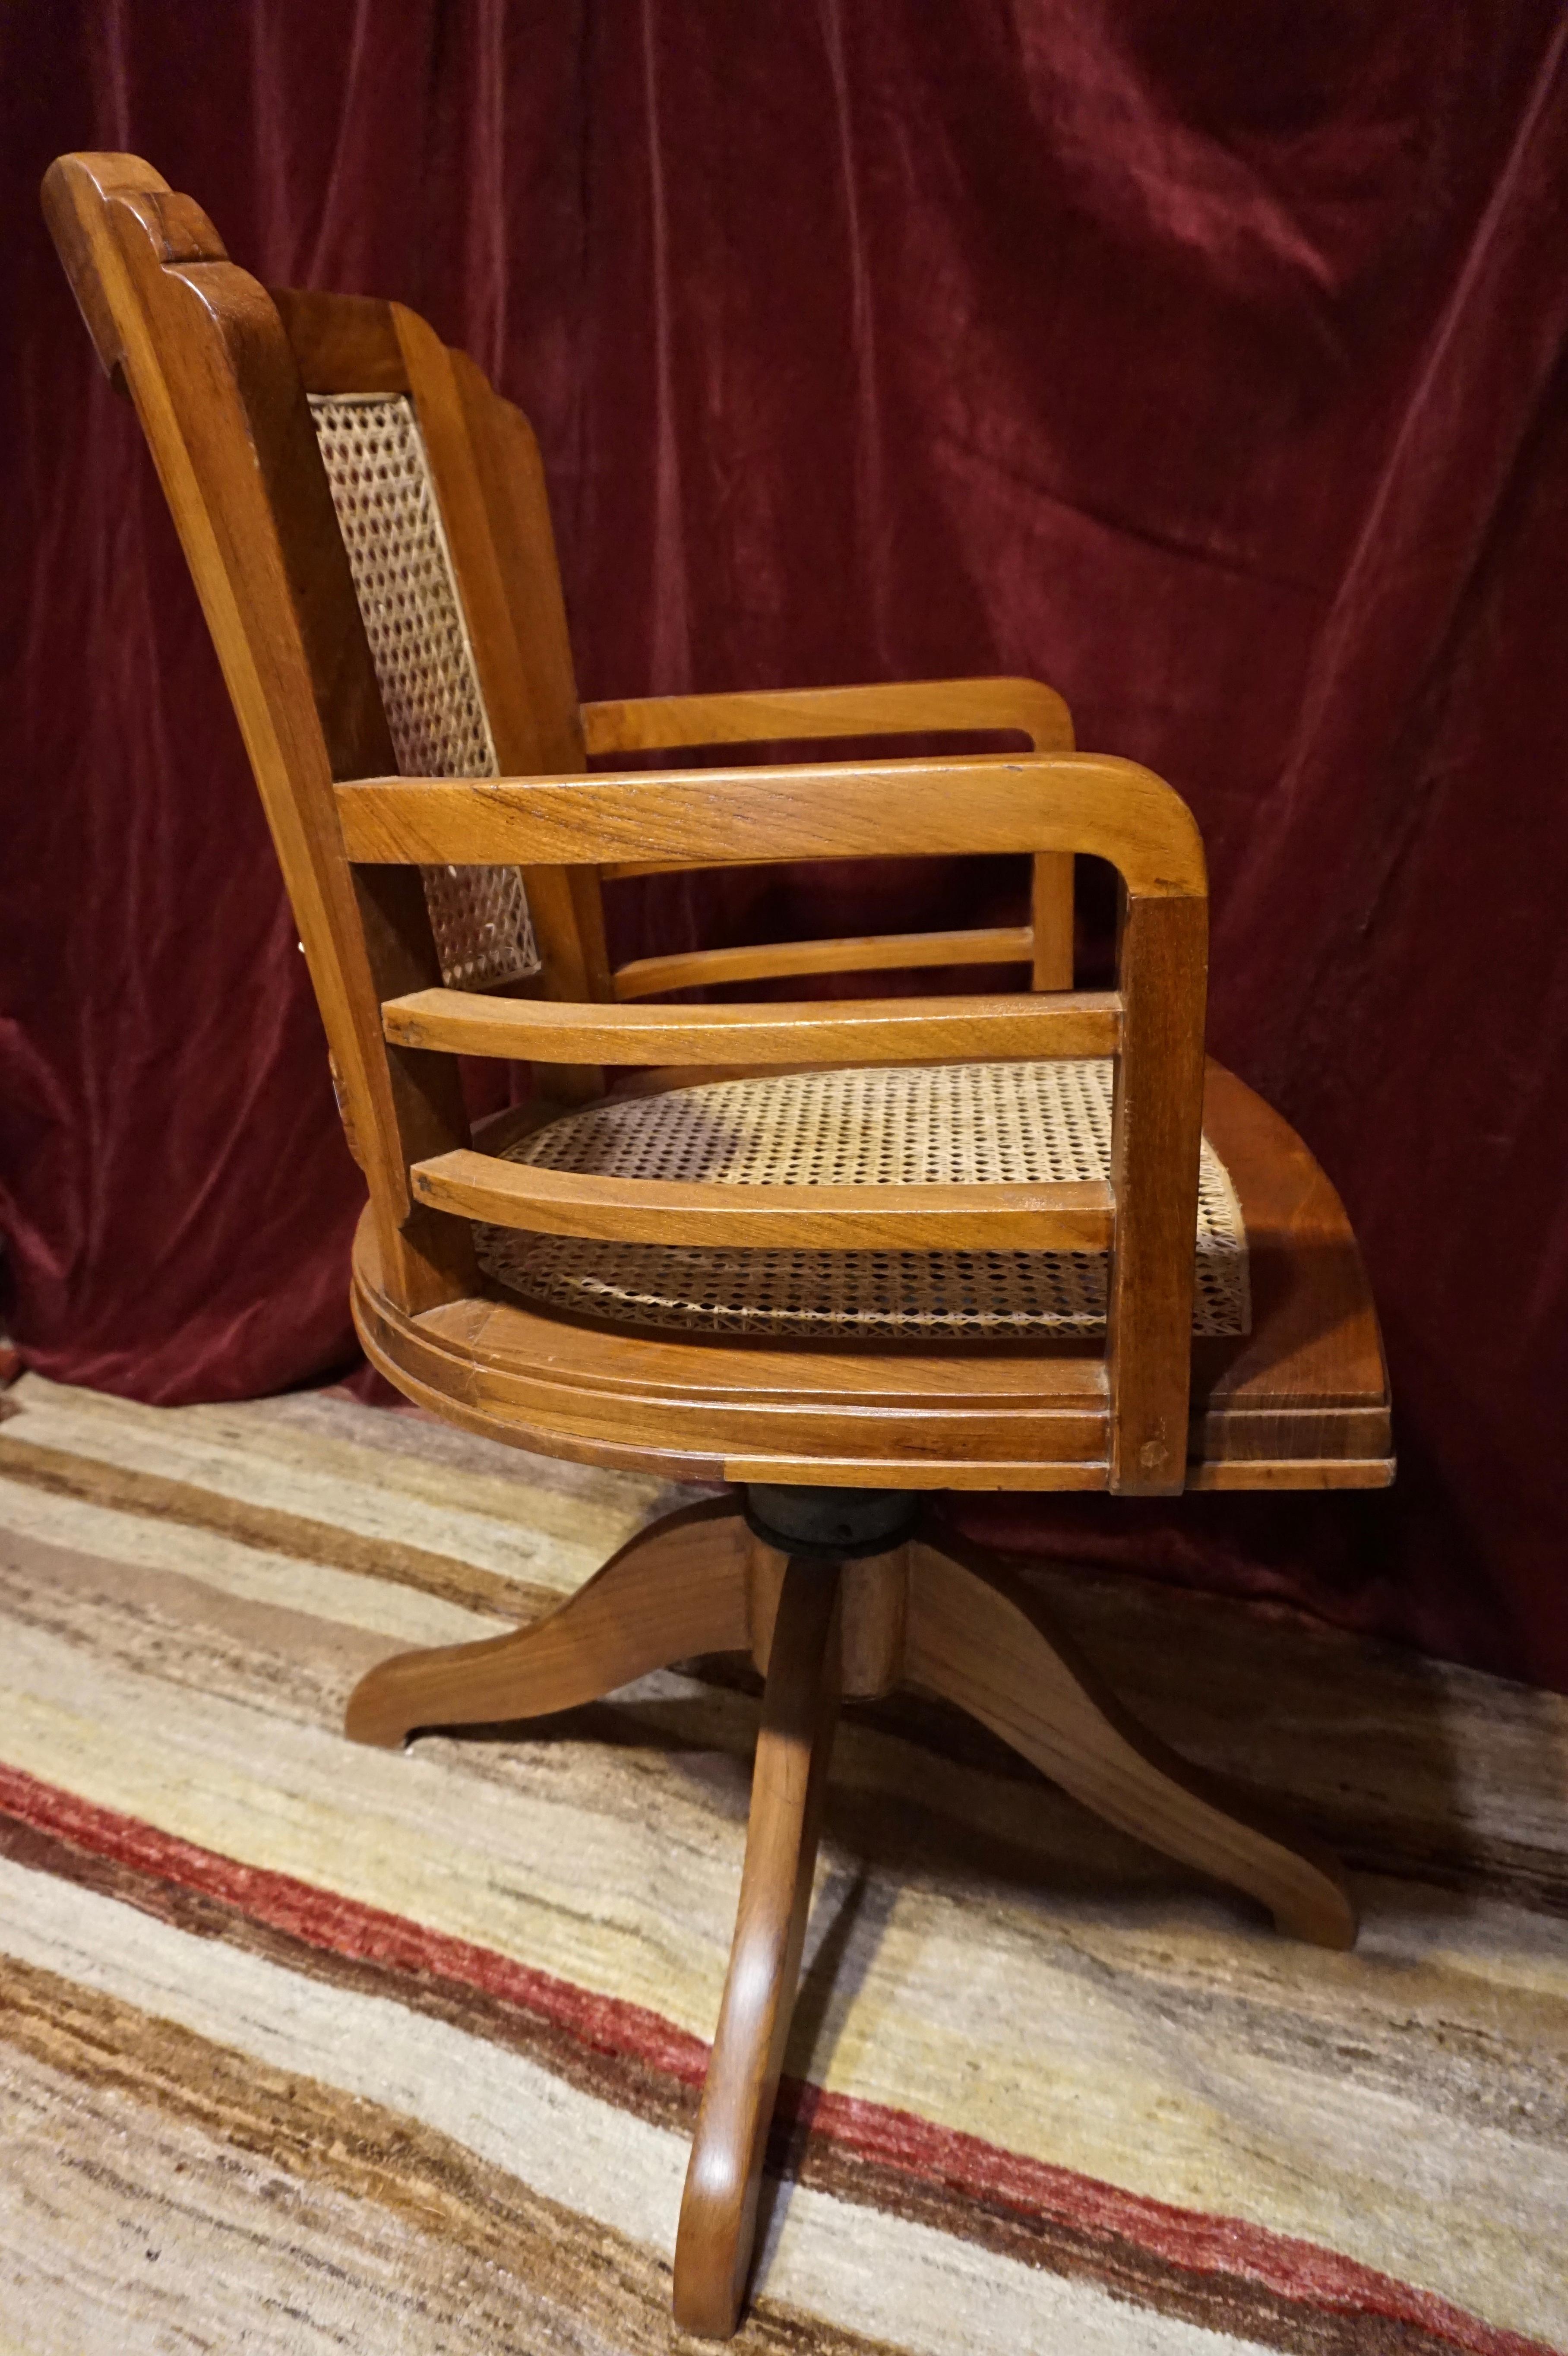 Art Deco Teak revolving chair with arms and original mechanism. Beautifully handcrafted from solid wood. Clean lines and sturdy throughout. Re-caned to last another lifetime. The cane work has been woven through the wood for durability. Very